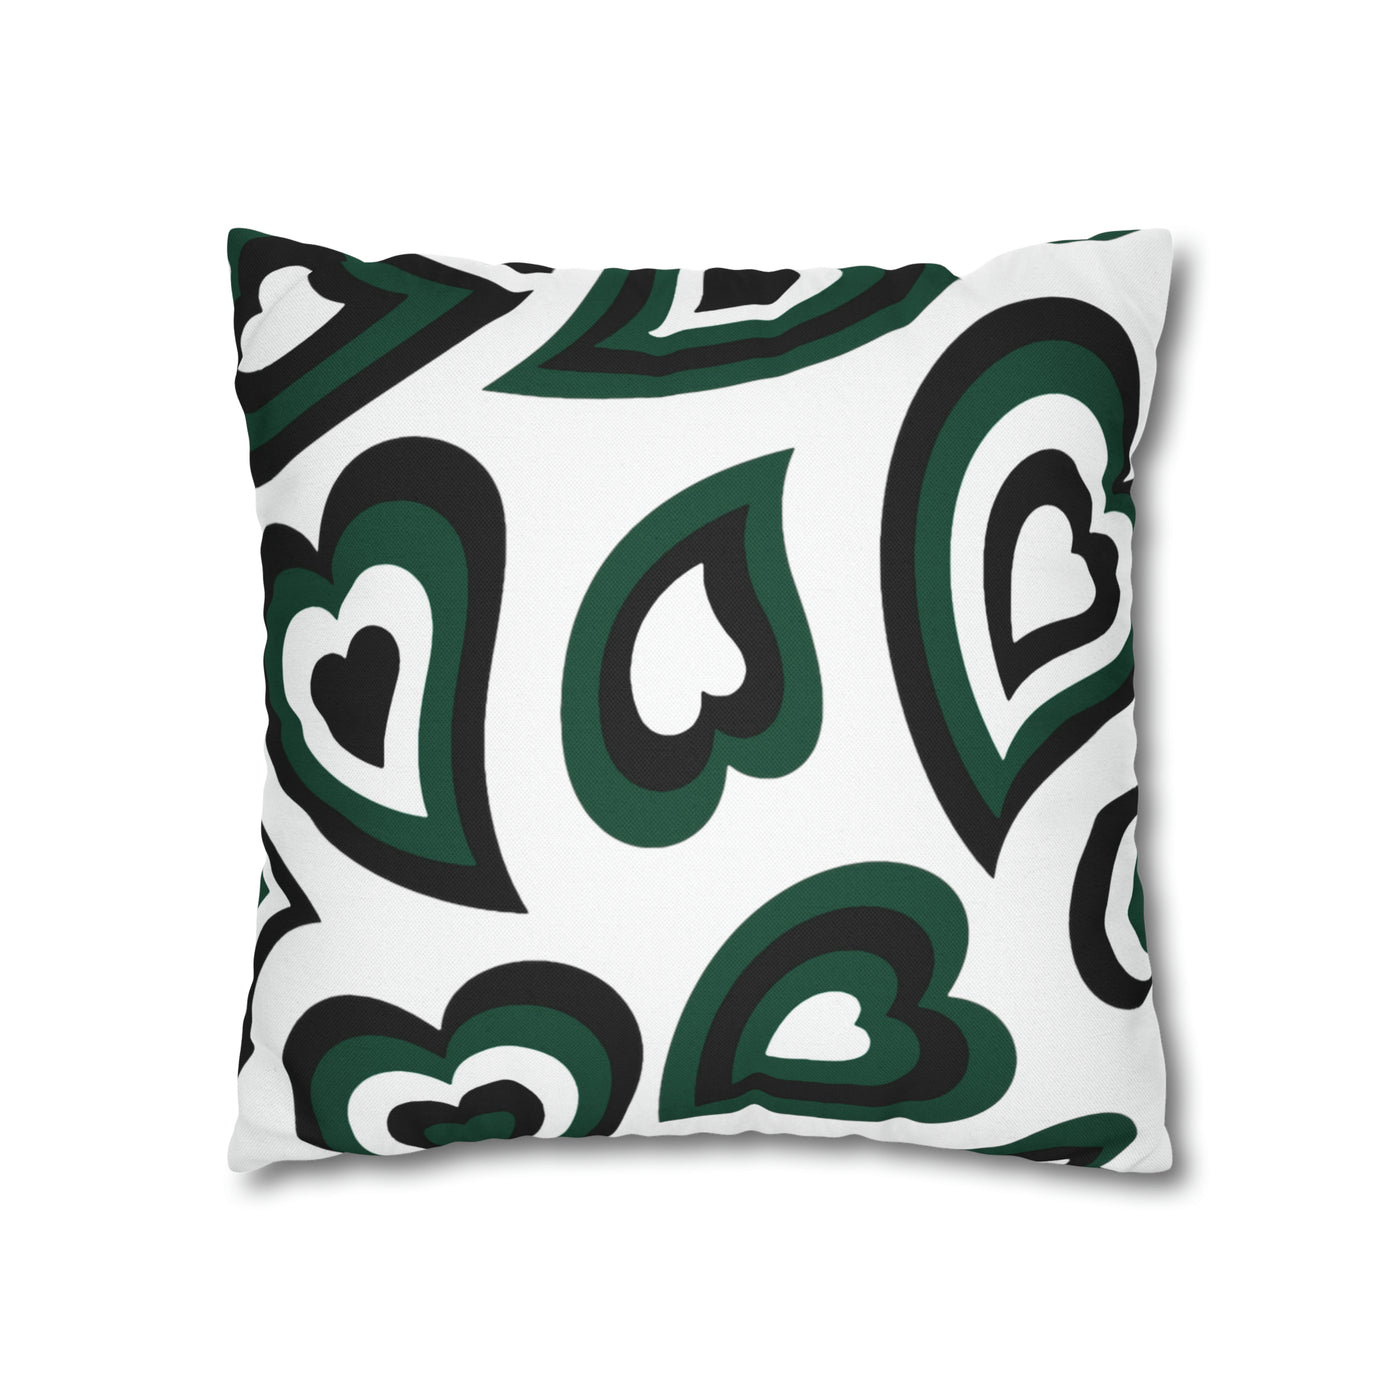 Retro Heart Pillow - Green and Black, Heart Pillow, Hearts, Valentine's Day, Michigan State, Bed Party Pillow, Sleepaway Camp Pillow, Camp